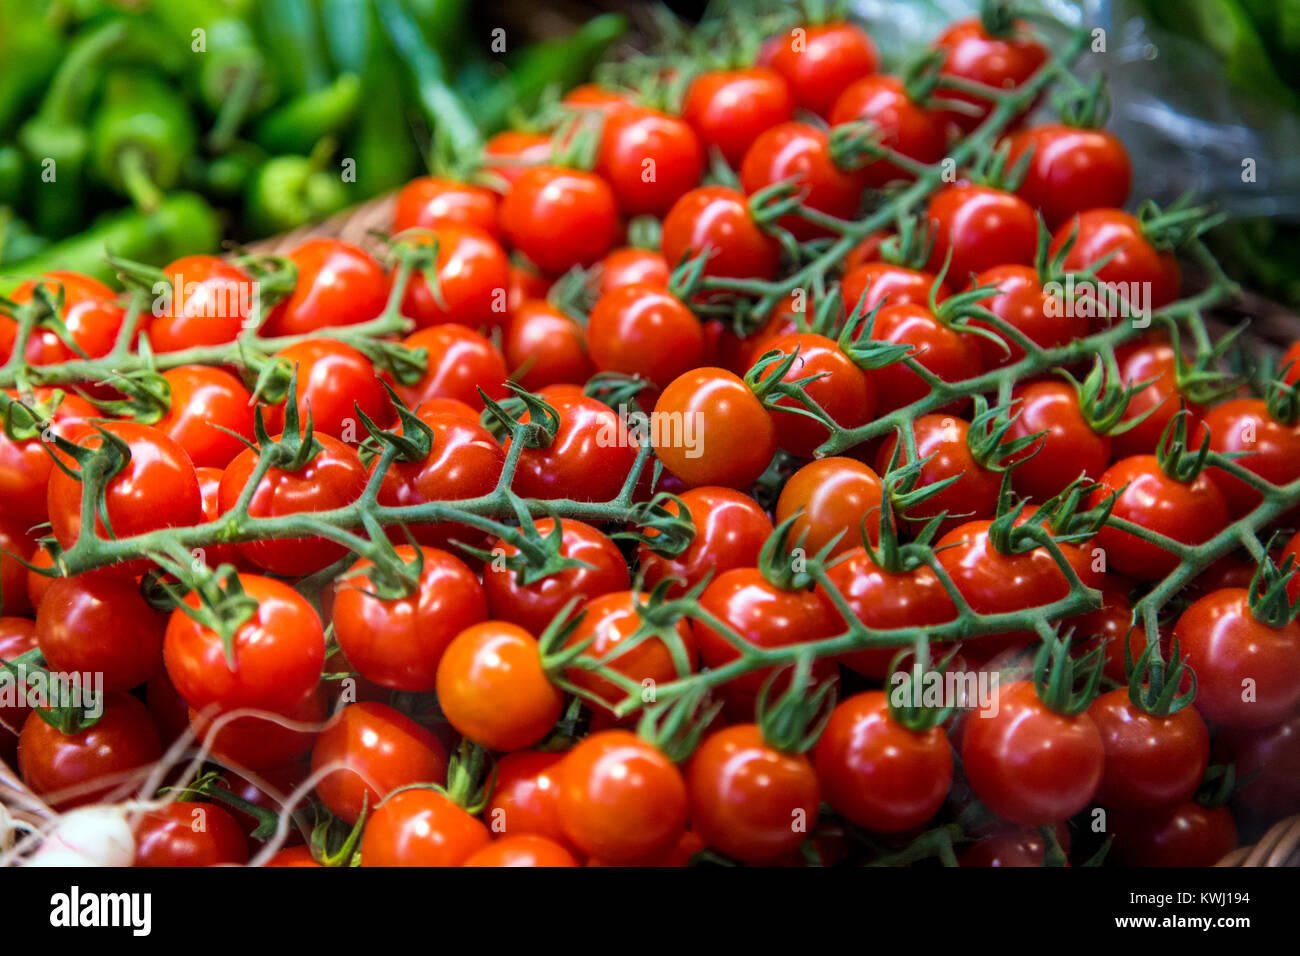 Fresh juicy vine tomatoes for sale at a market Stock Photo